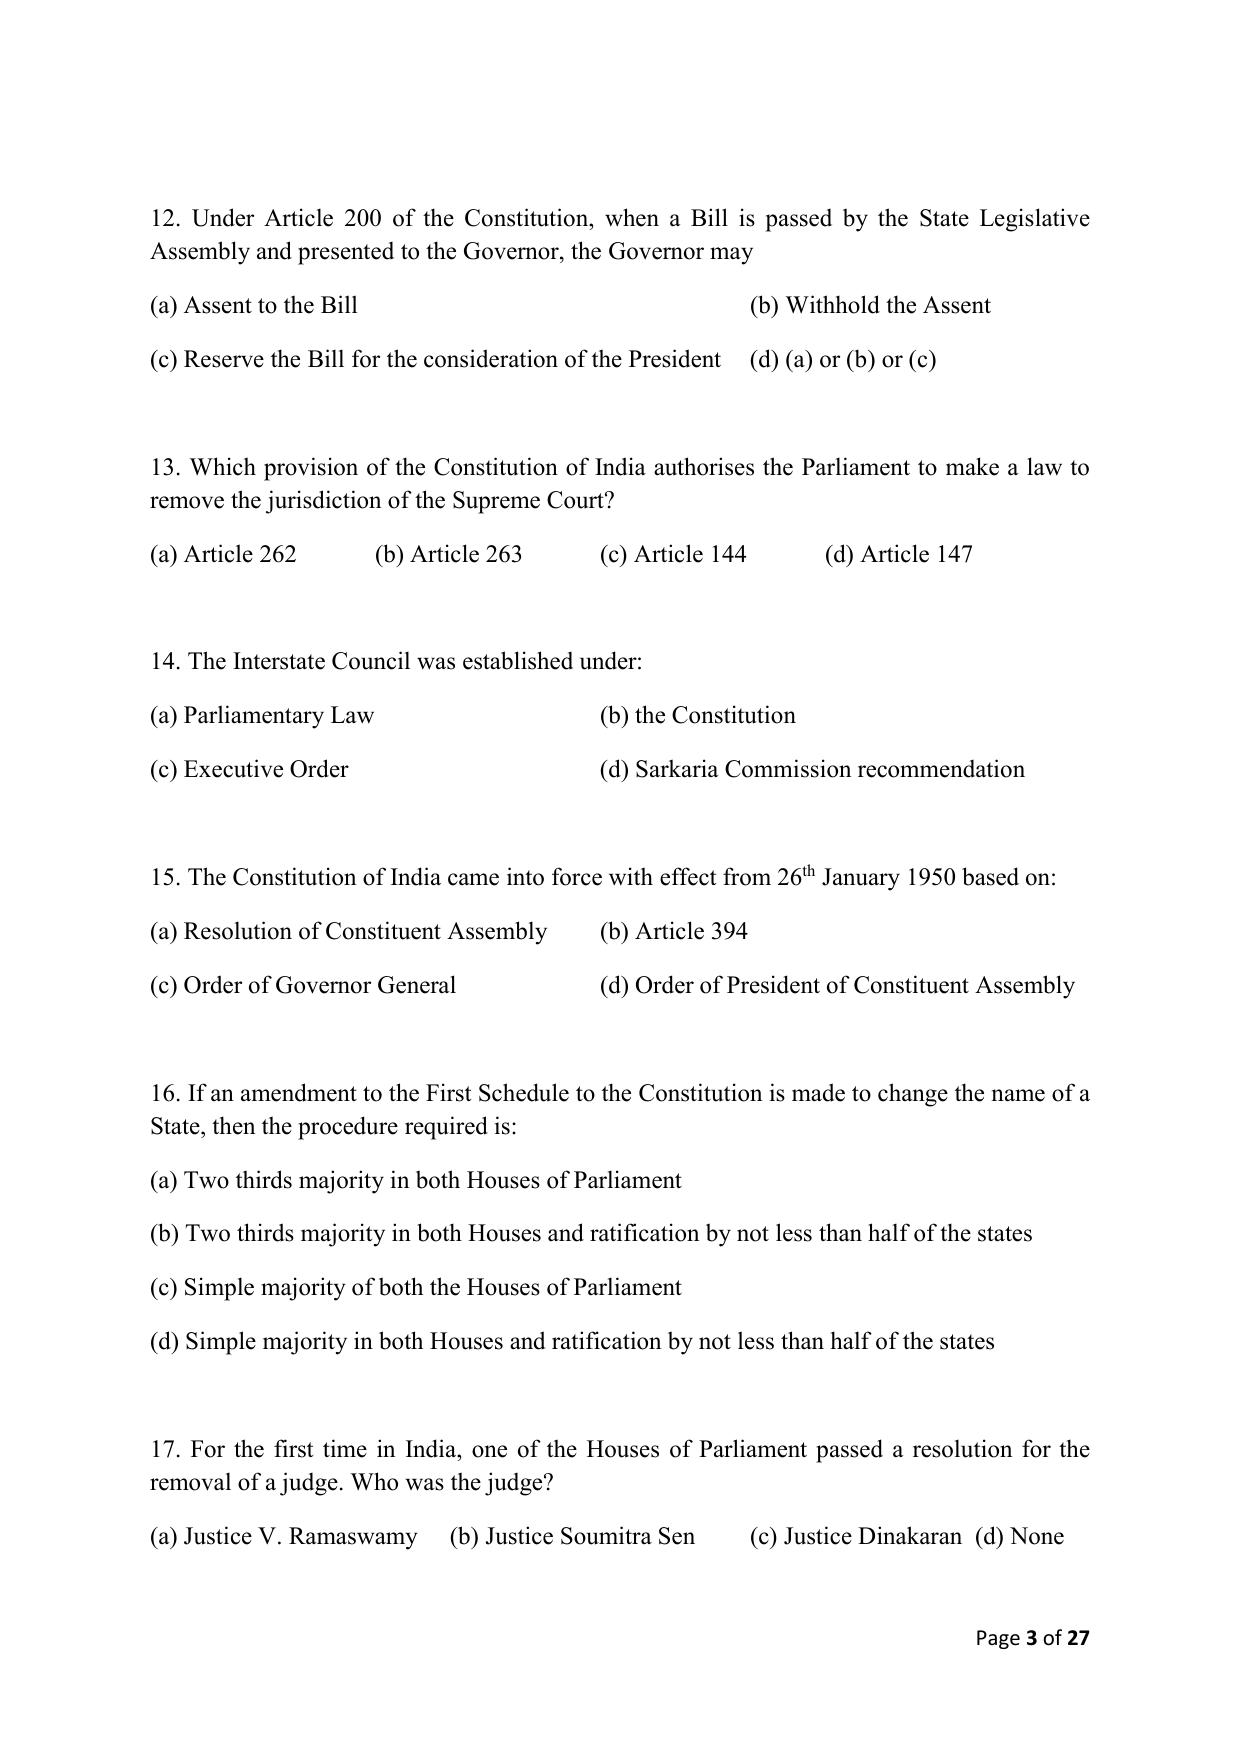 AILET 2020 Question Paper for LLM - Page 3